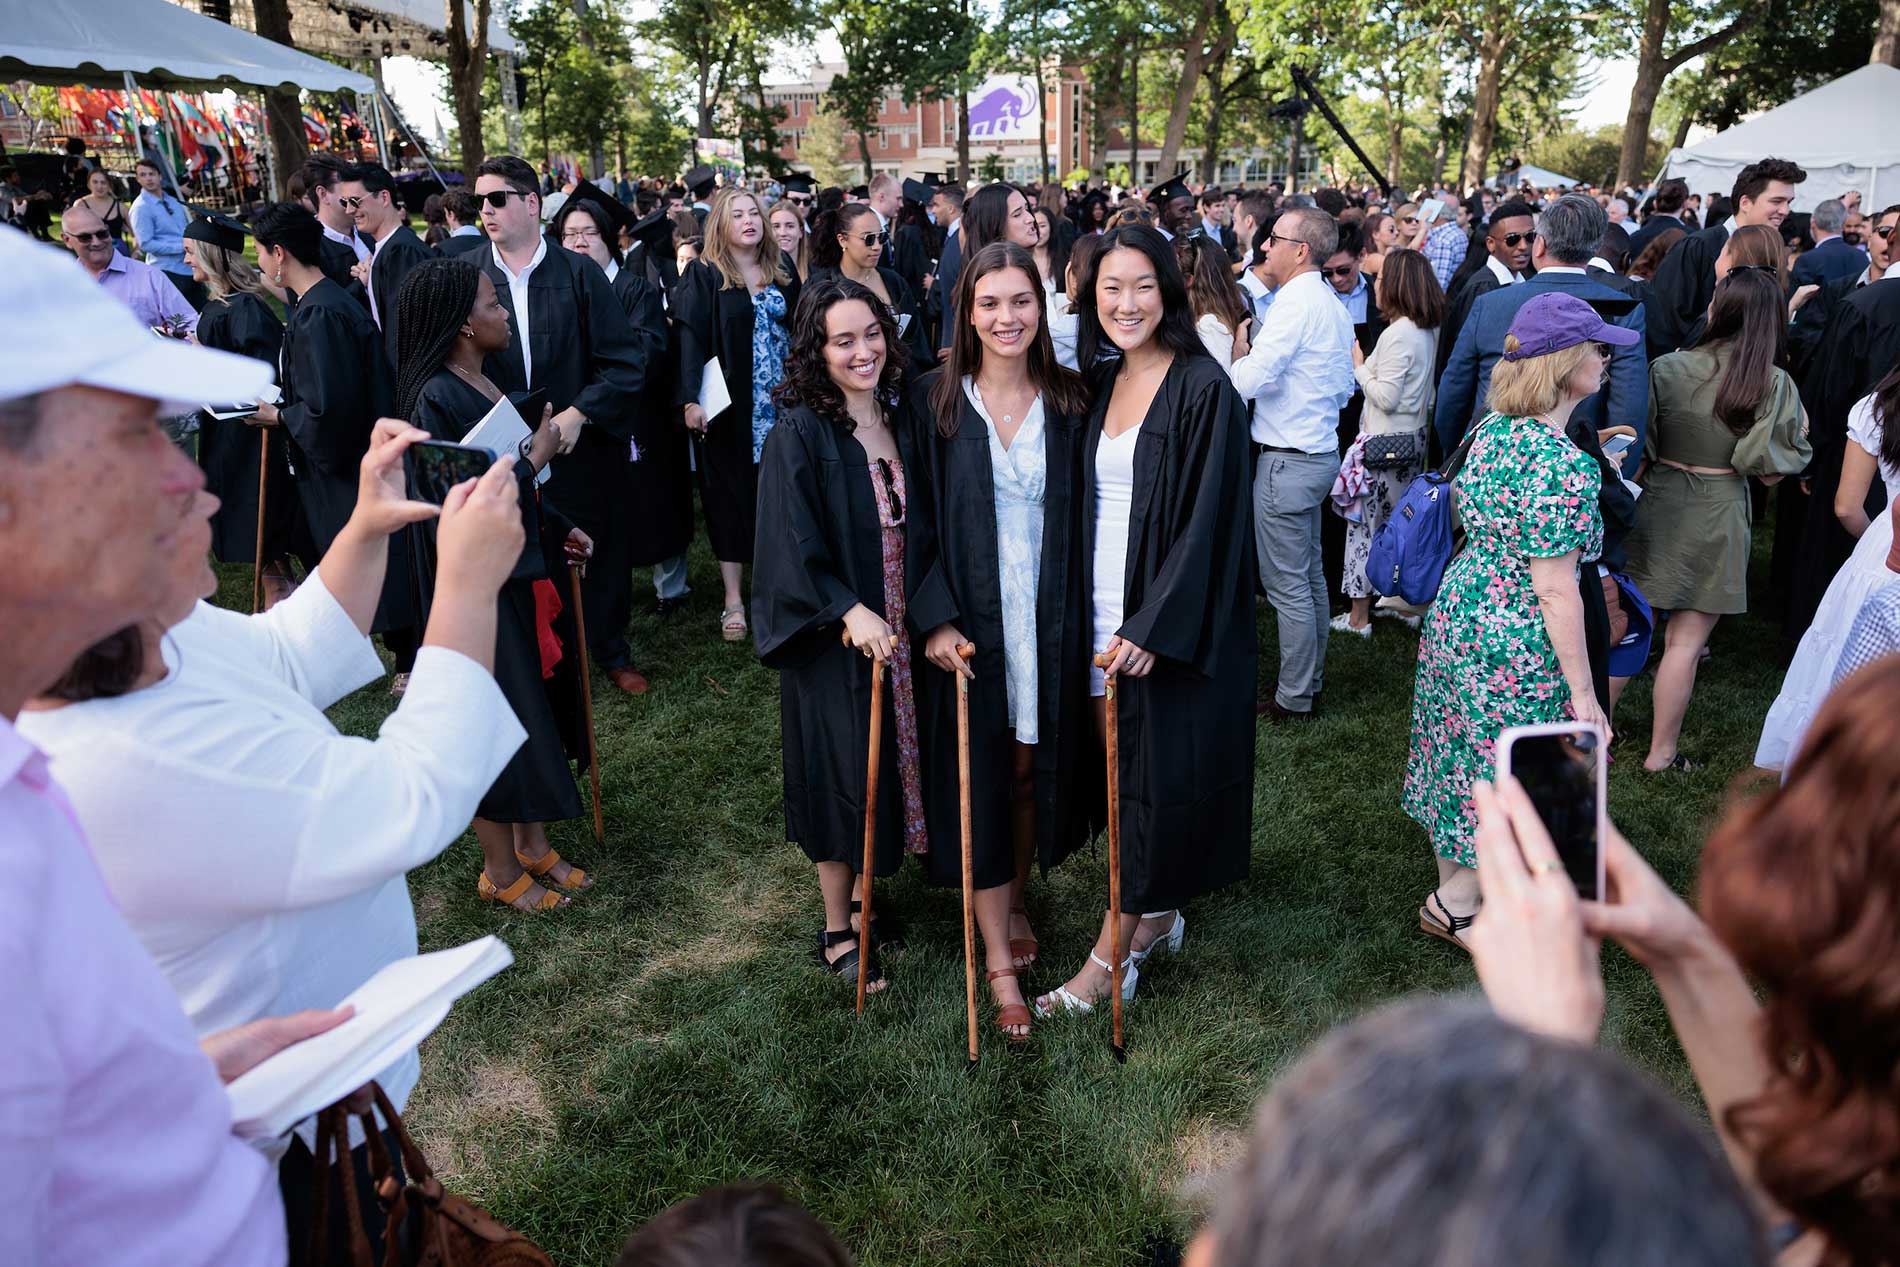 Three graduates pose for a photo in the middle of a crowd.